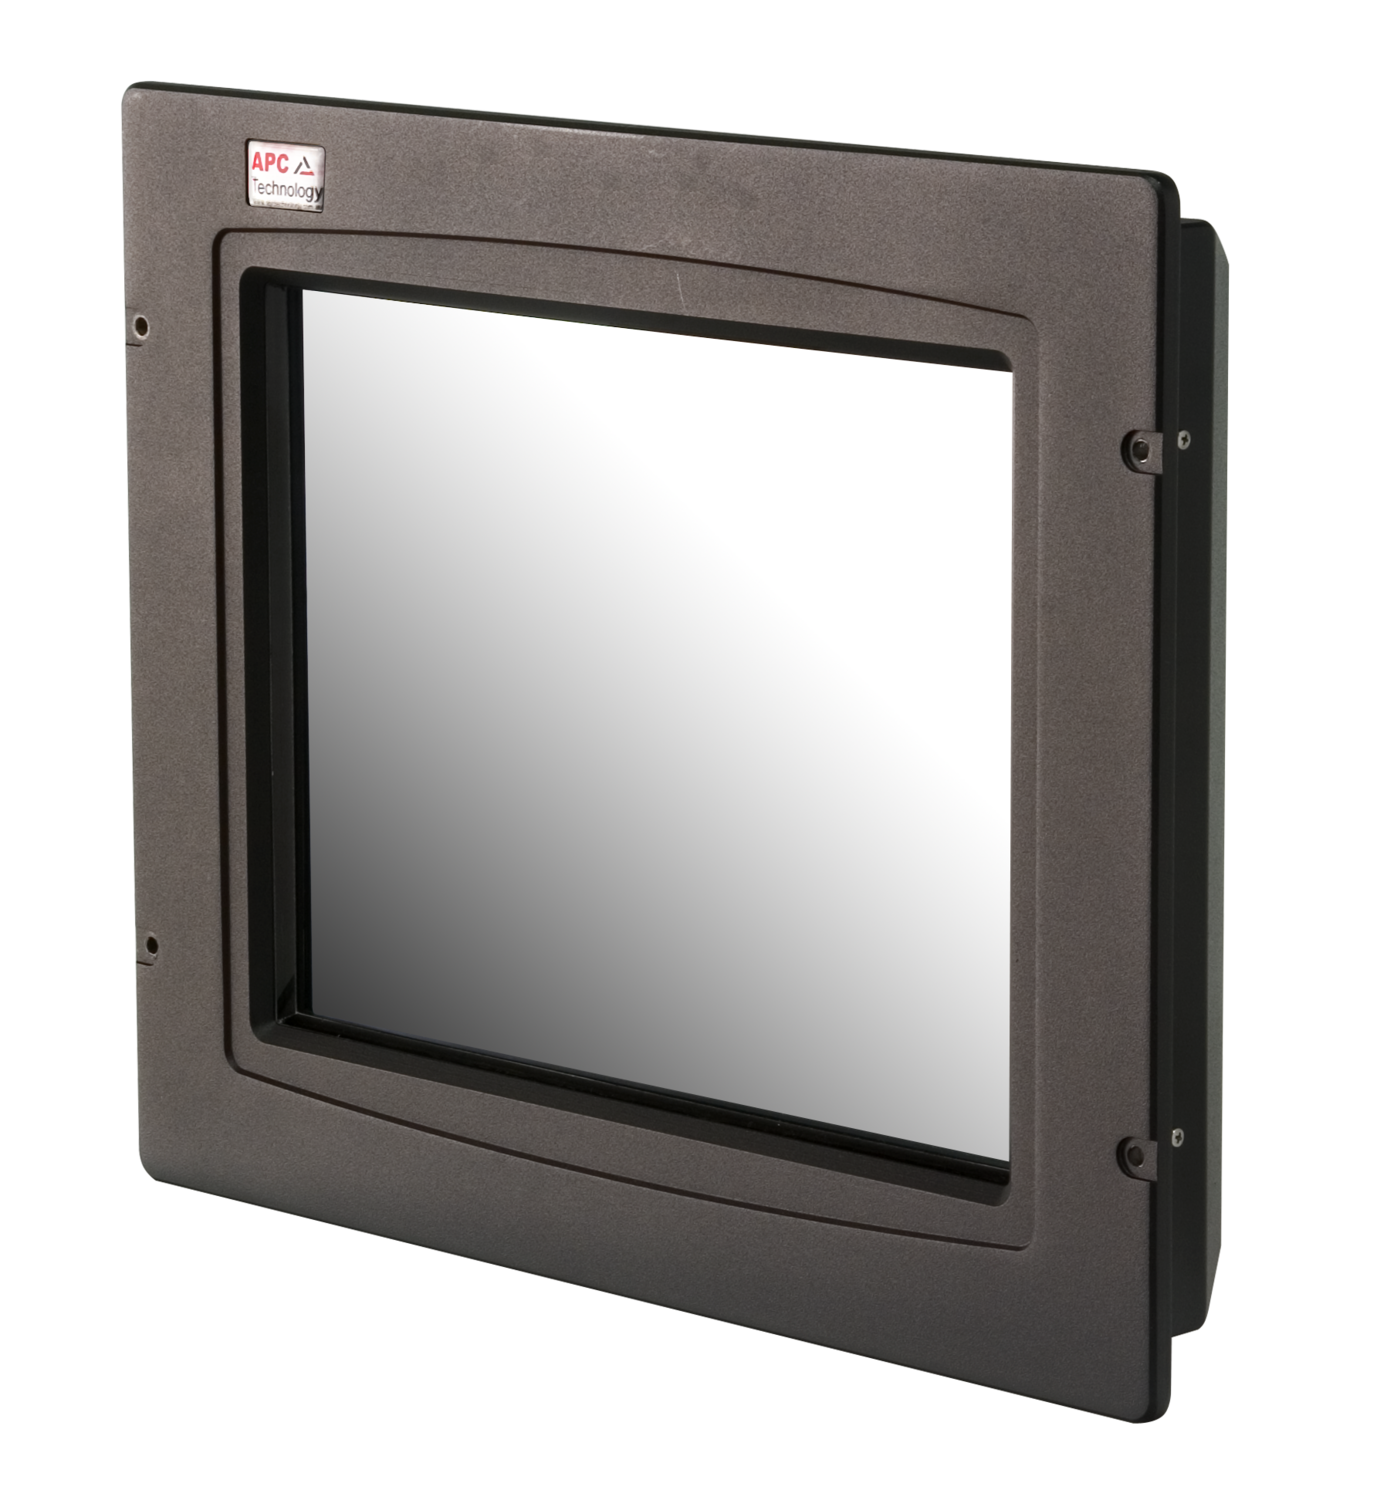 APC Technology - Display with optional Touchscreen CT Series